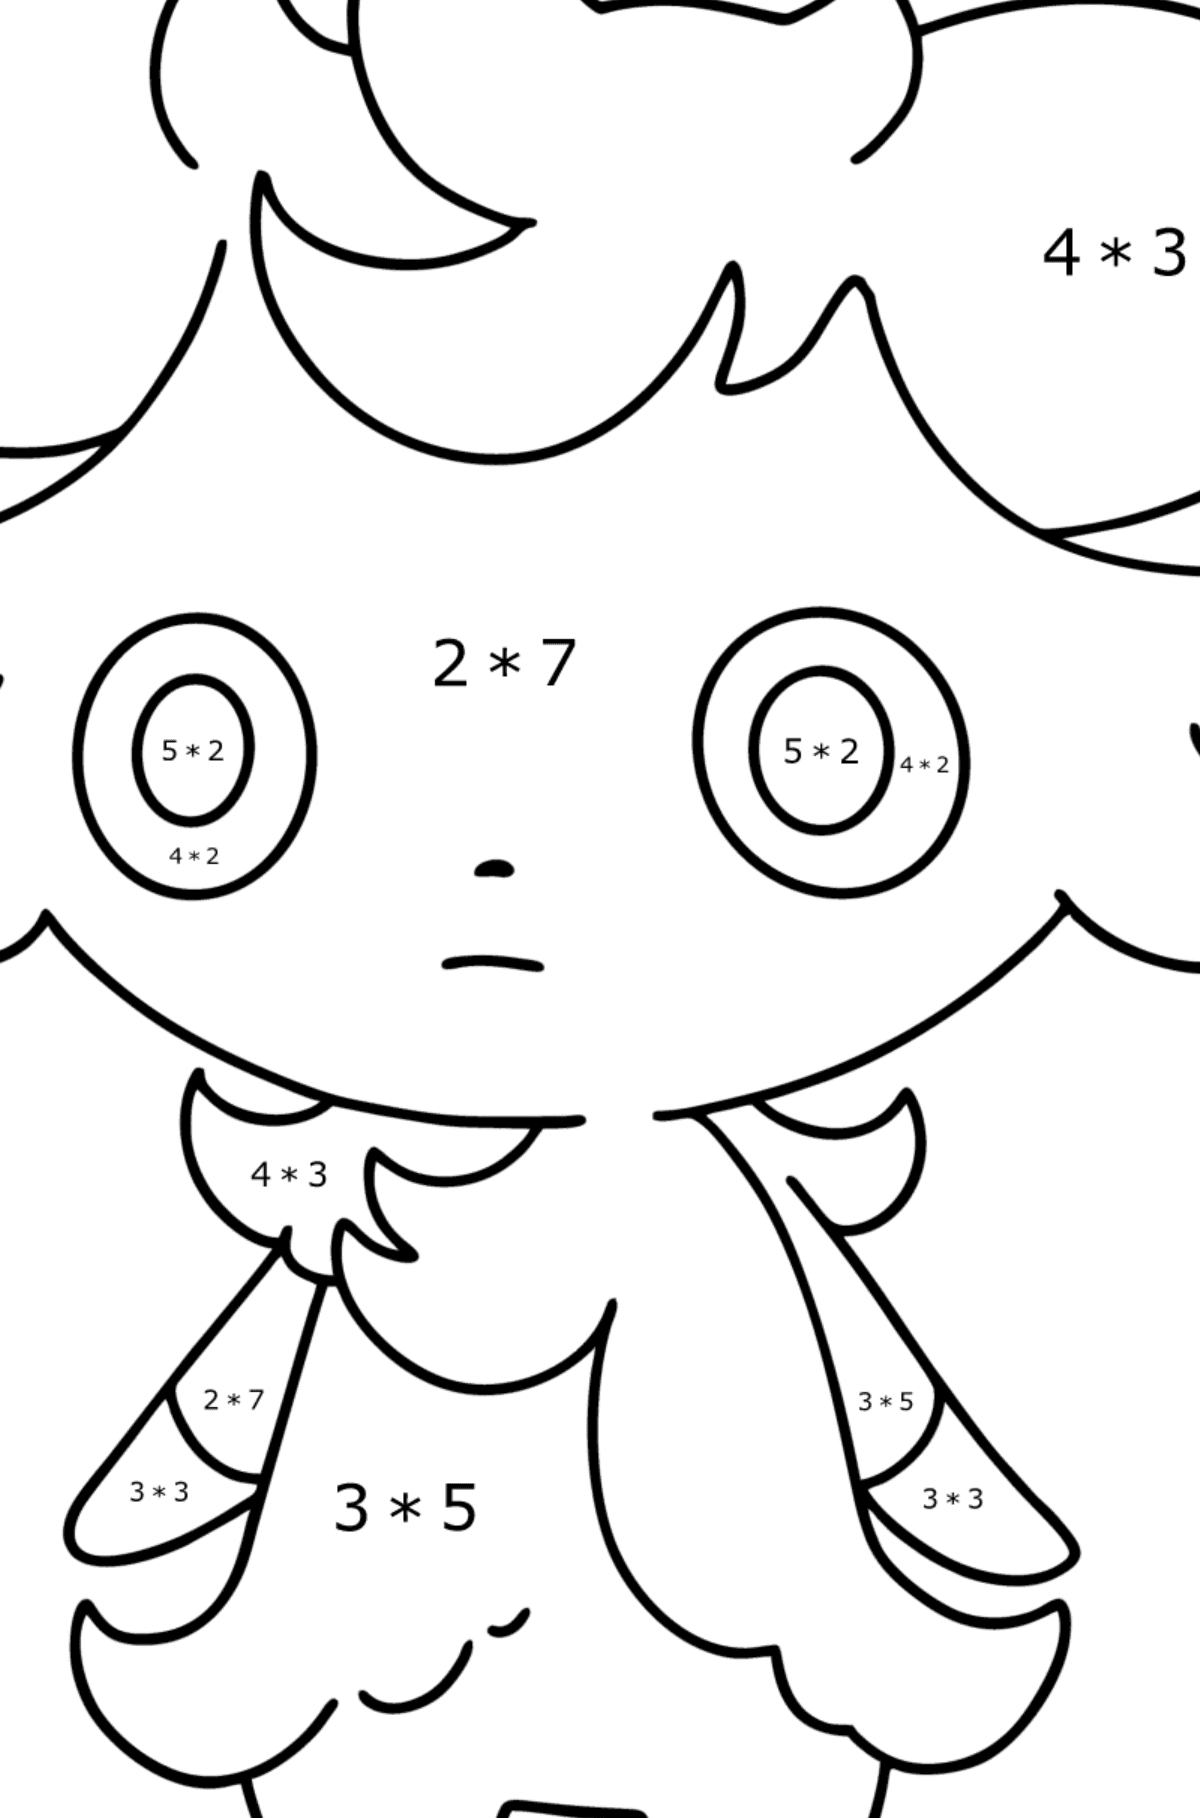 Pokemon Go Espurr coloring page - Math Coloring - Multiplication for Kids